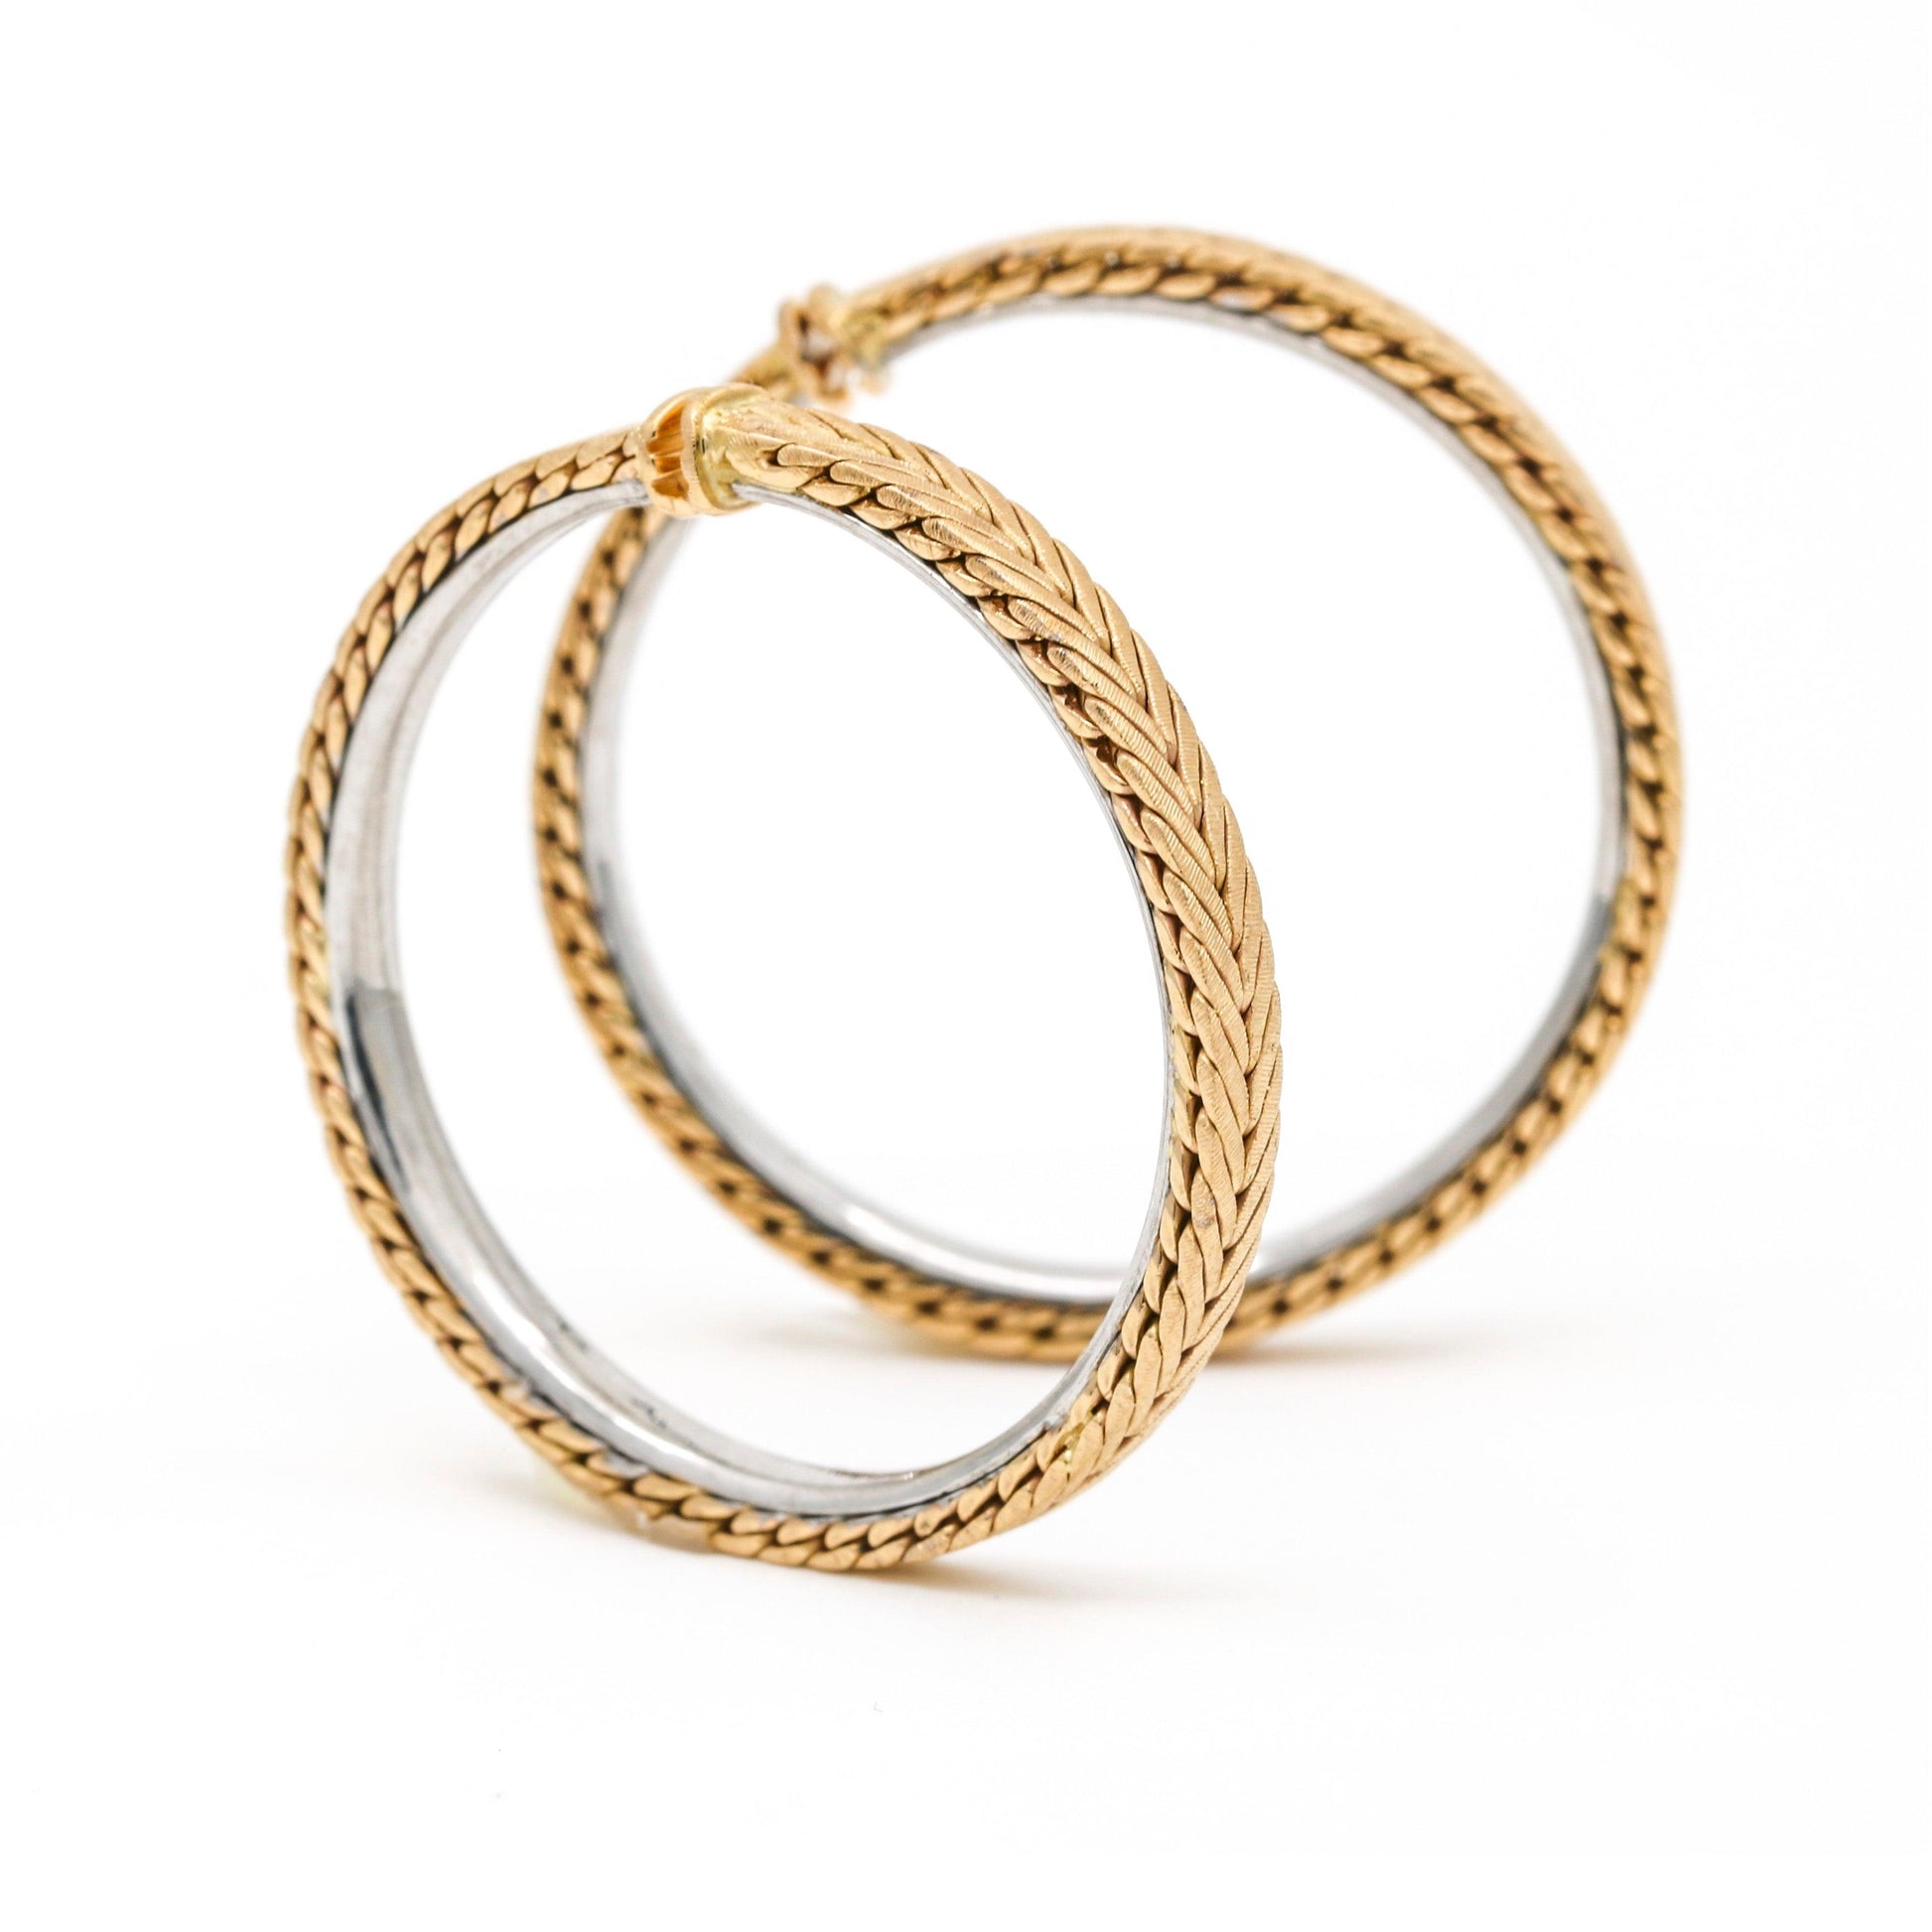 Buccellati Braided Round Hoop Earrings in 18k Rose White Gold Clip-On Hinged - 31 Jewels Inc.